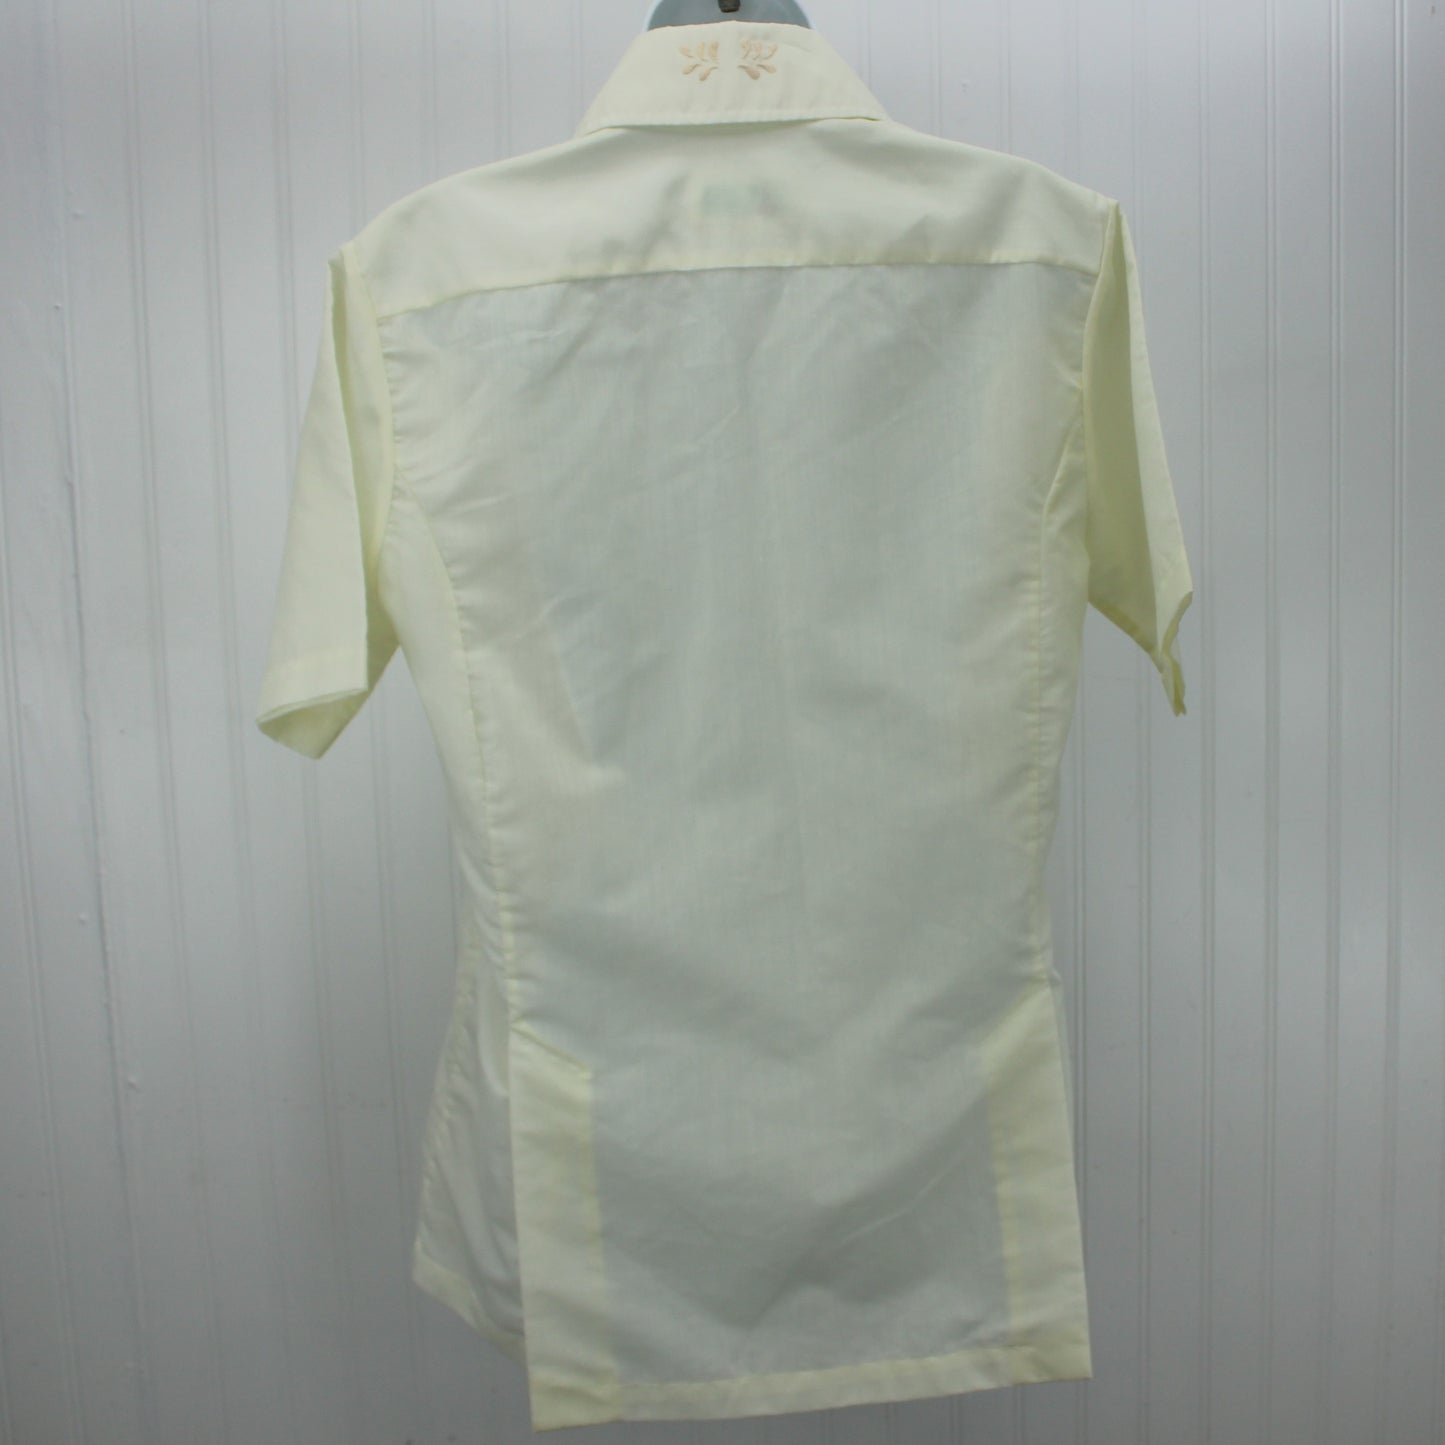 Older Filipino Baron Shirt Heavily Embroidered Pocket Front Placket Back All Gender back view of shirt with plackets at hem